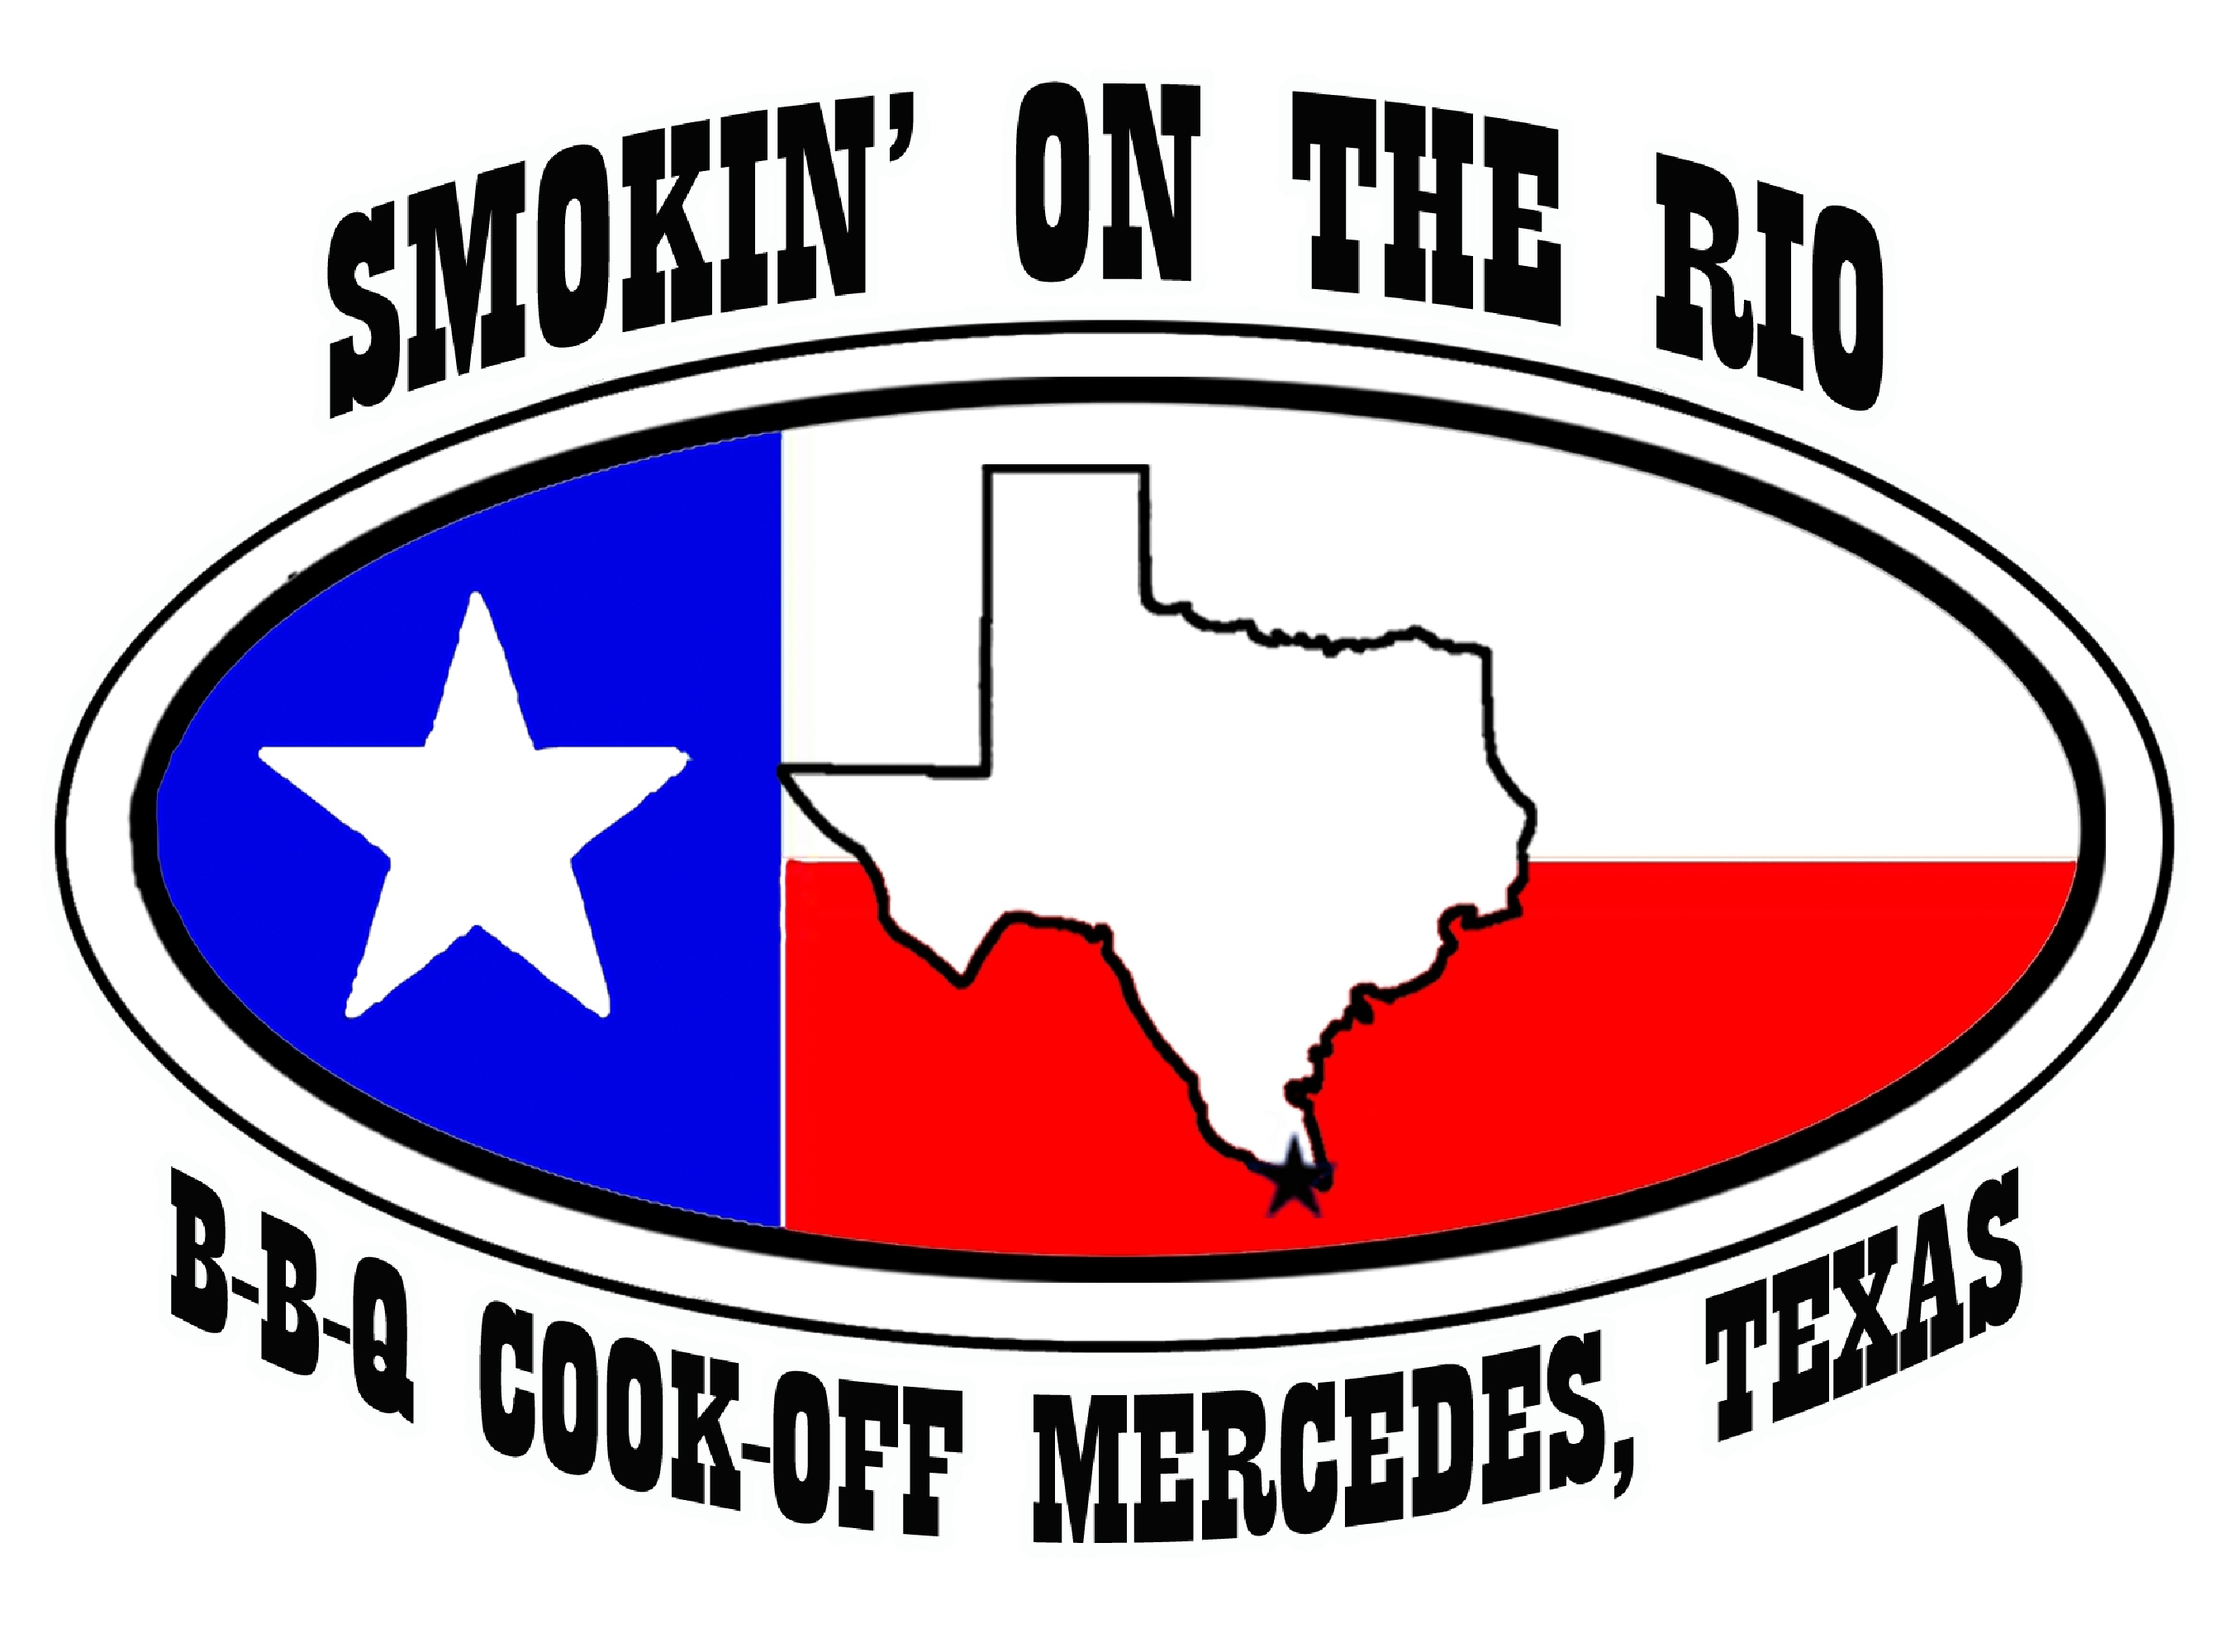 Smokin' on the Rio - State Championship BBQ Cookoff